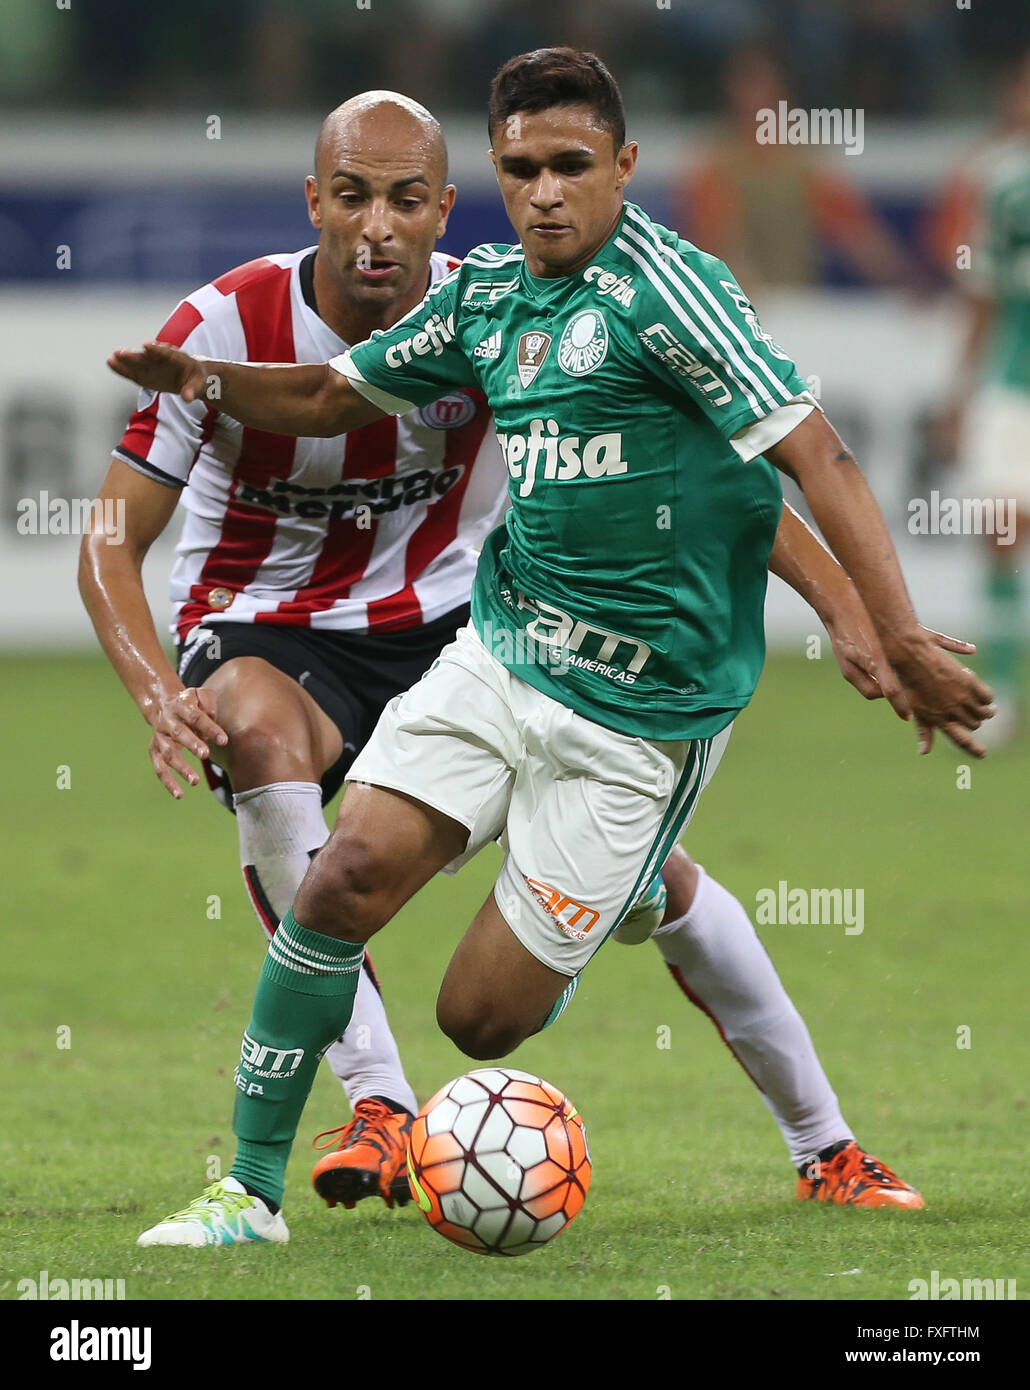 SAO PAULO, Brazil - 14/04/2016: PALM RIVER PLATE X URU - The Erik, the SE Palmeiras, ball dispute with the player Ronaldo Concei??o, CA River Plate, during a match valid for the sixth round of the group stage of the Copa Libertadores at the Allianz Arena Park. Photo: Cesar Greco / FotoArena/Alamy Live News Stock Photo